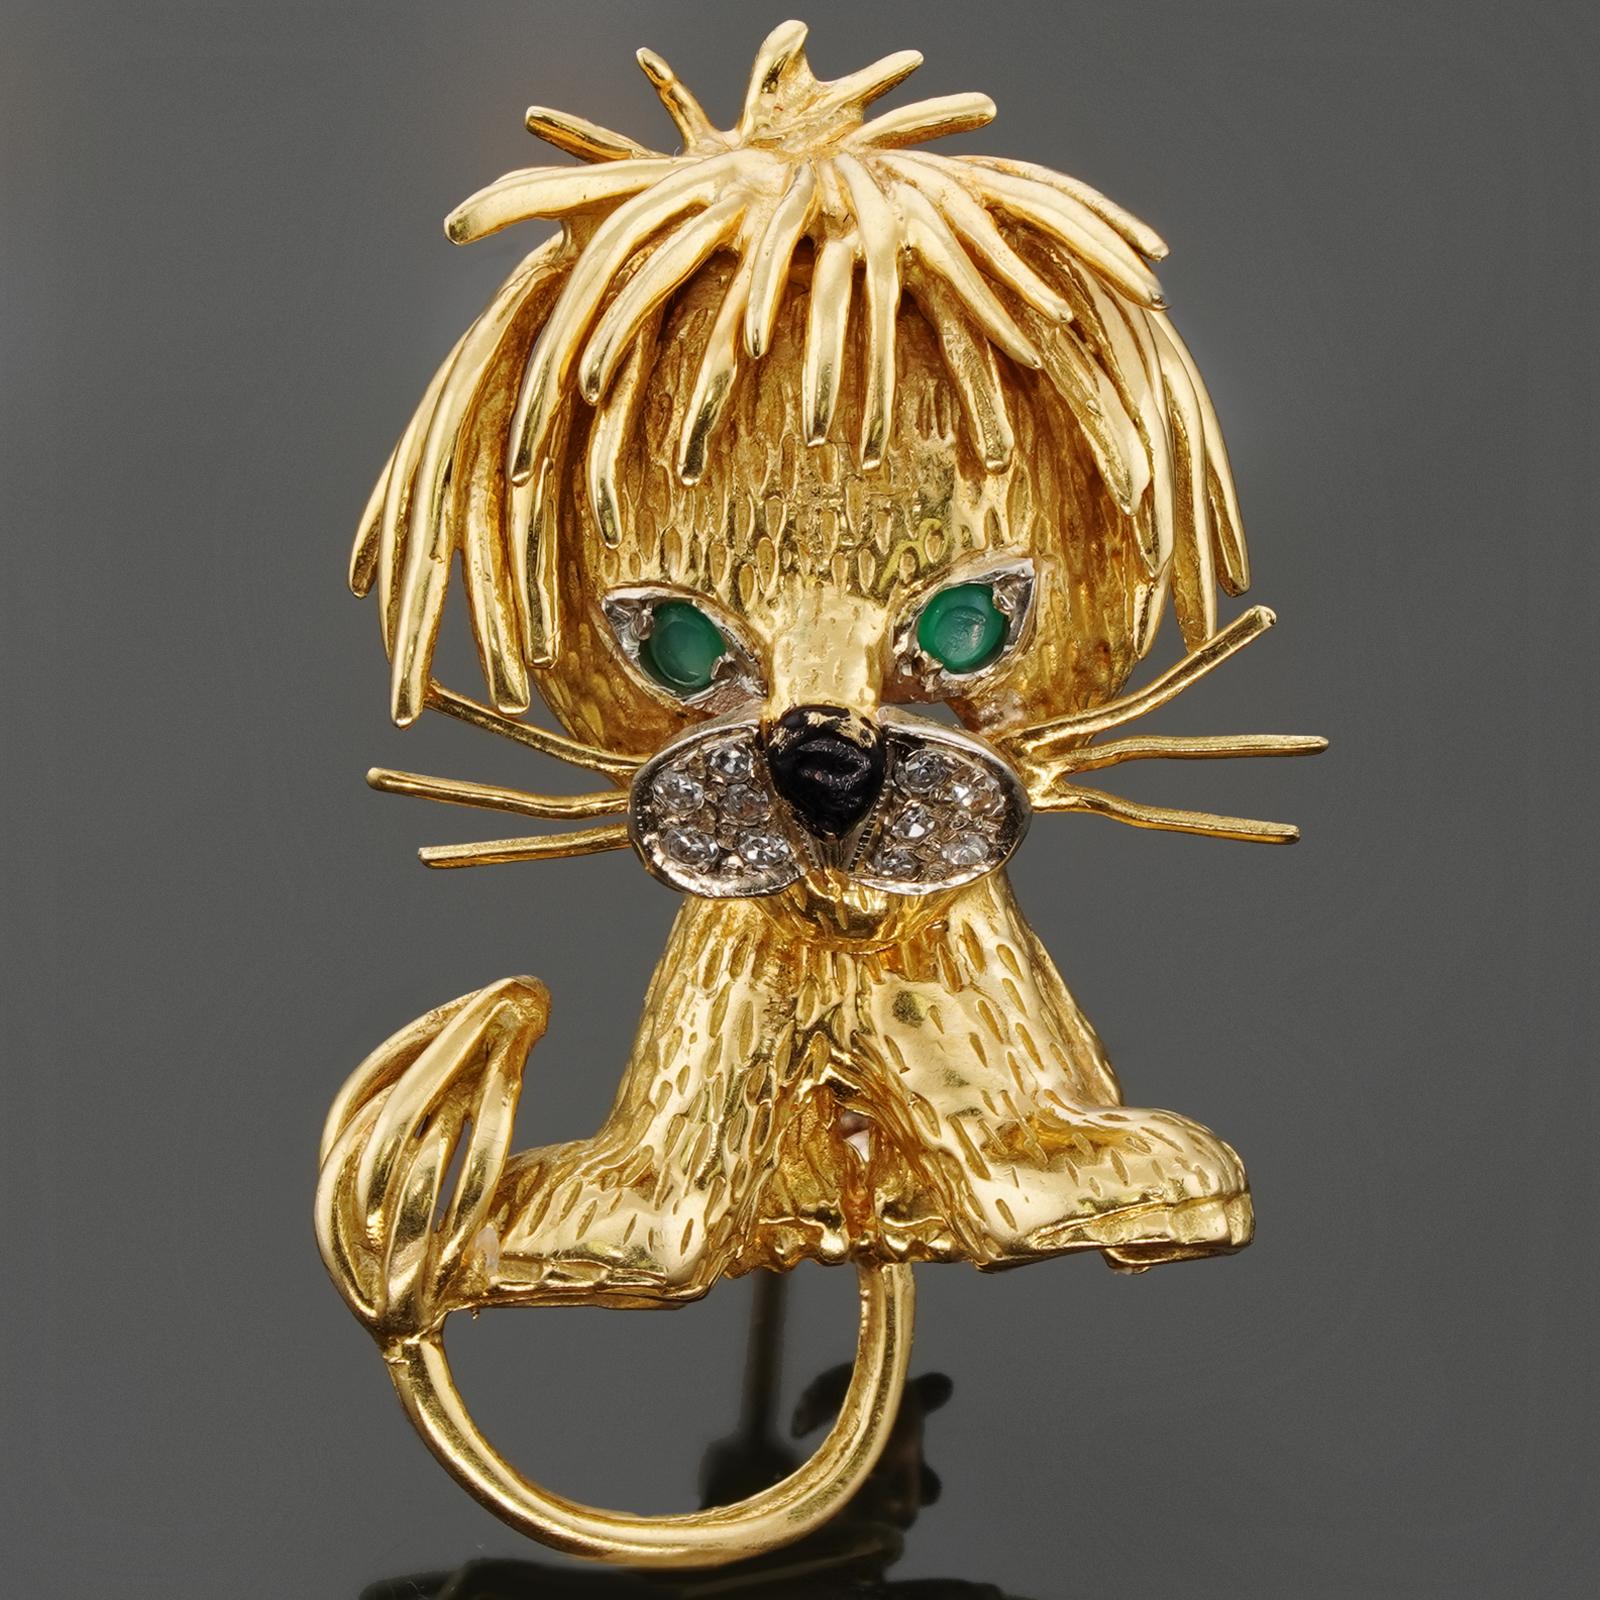 This iconic Van Cleef & Arpels brooch features a fabulous lion design crafted in 18k yellow gold and accented with brilliant-cut diamonds, green emerald eyes, and a black enamel nose. Made in France circa 1980s. Measurements: 0.78